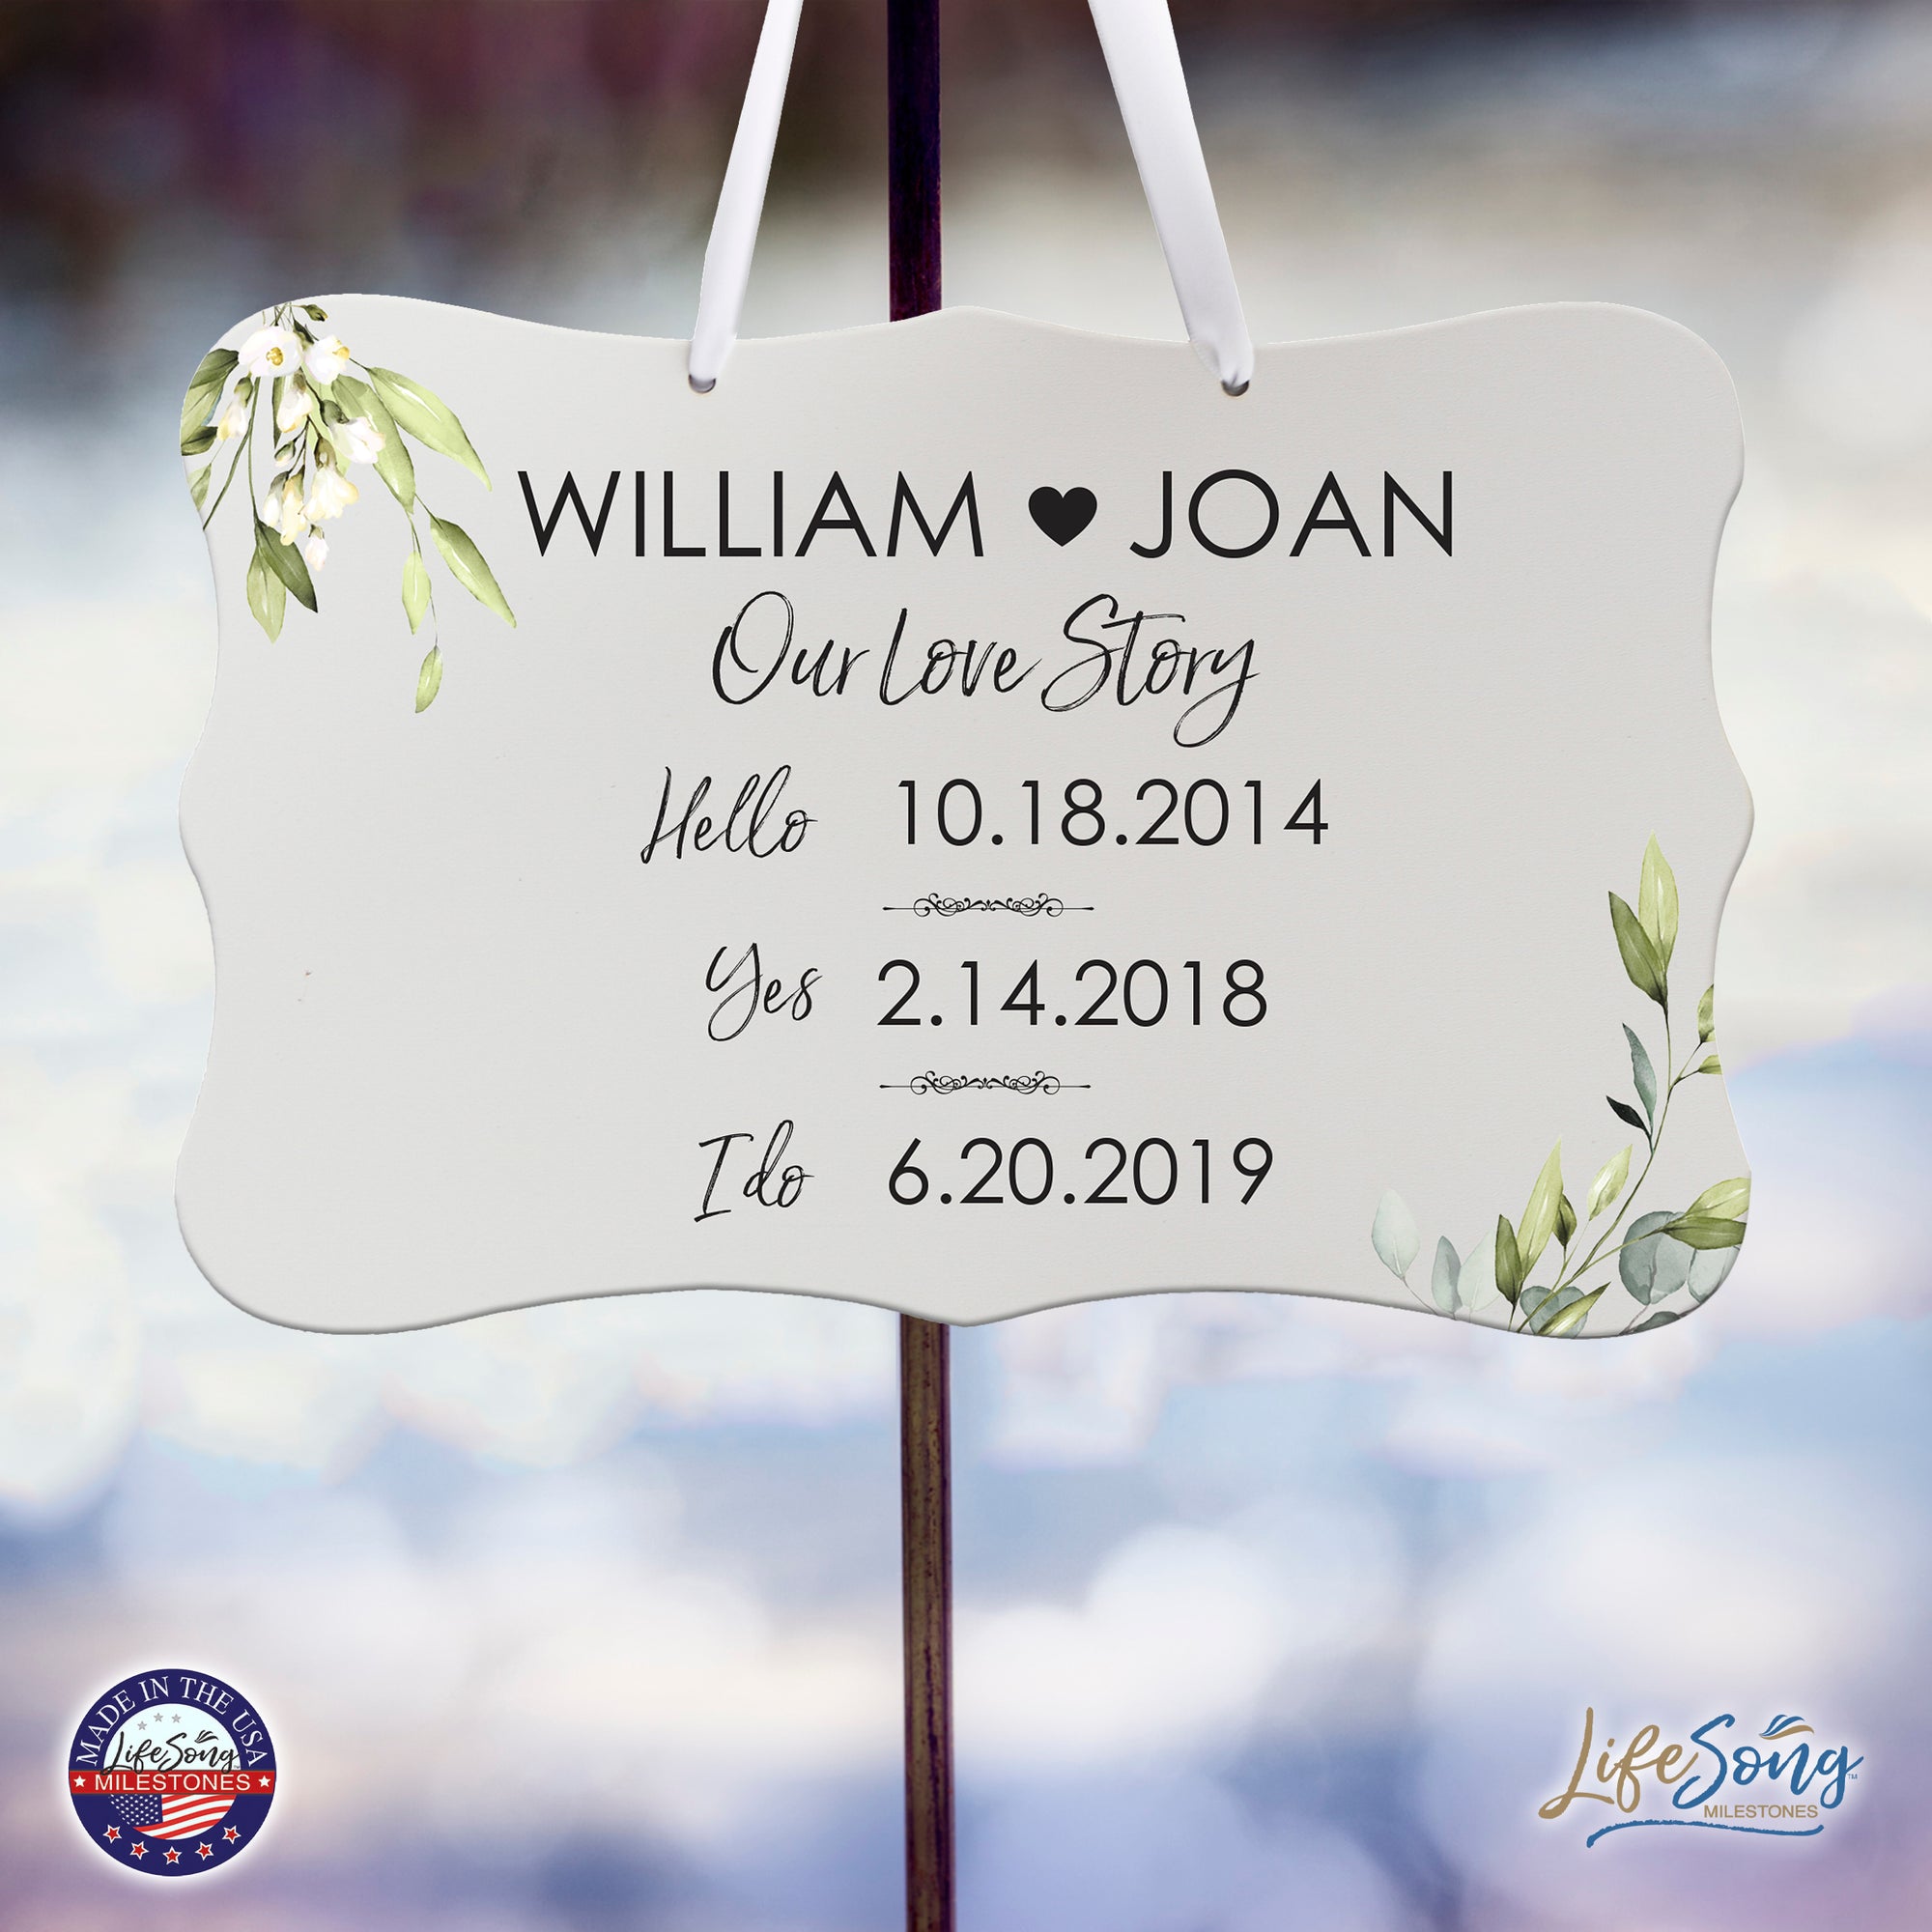 Custom Wedding Wall Hanging Signs For Ceremony And Reception For Couple - Our Love Story